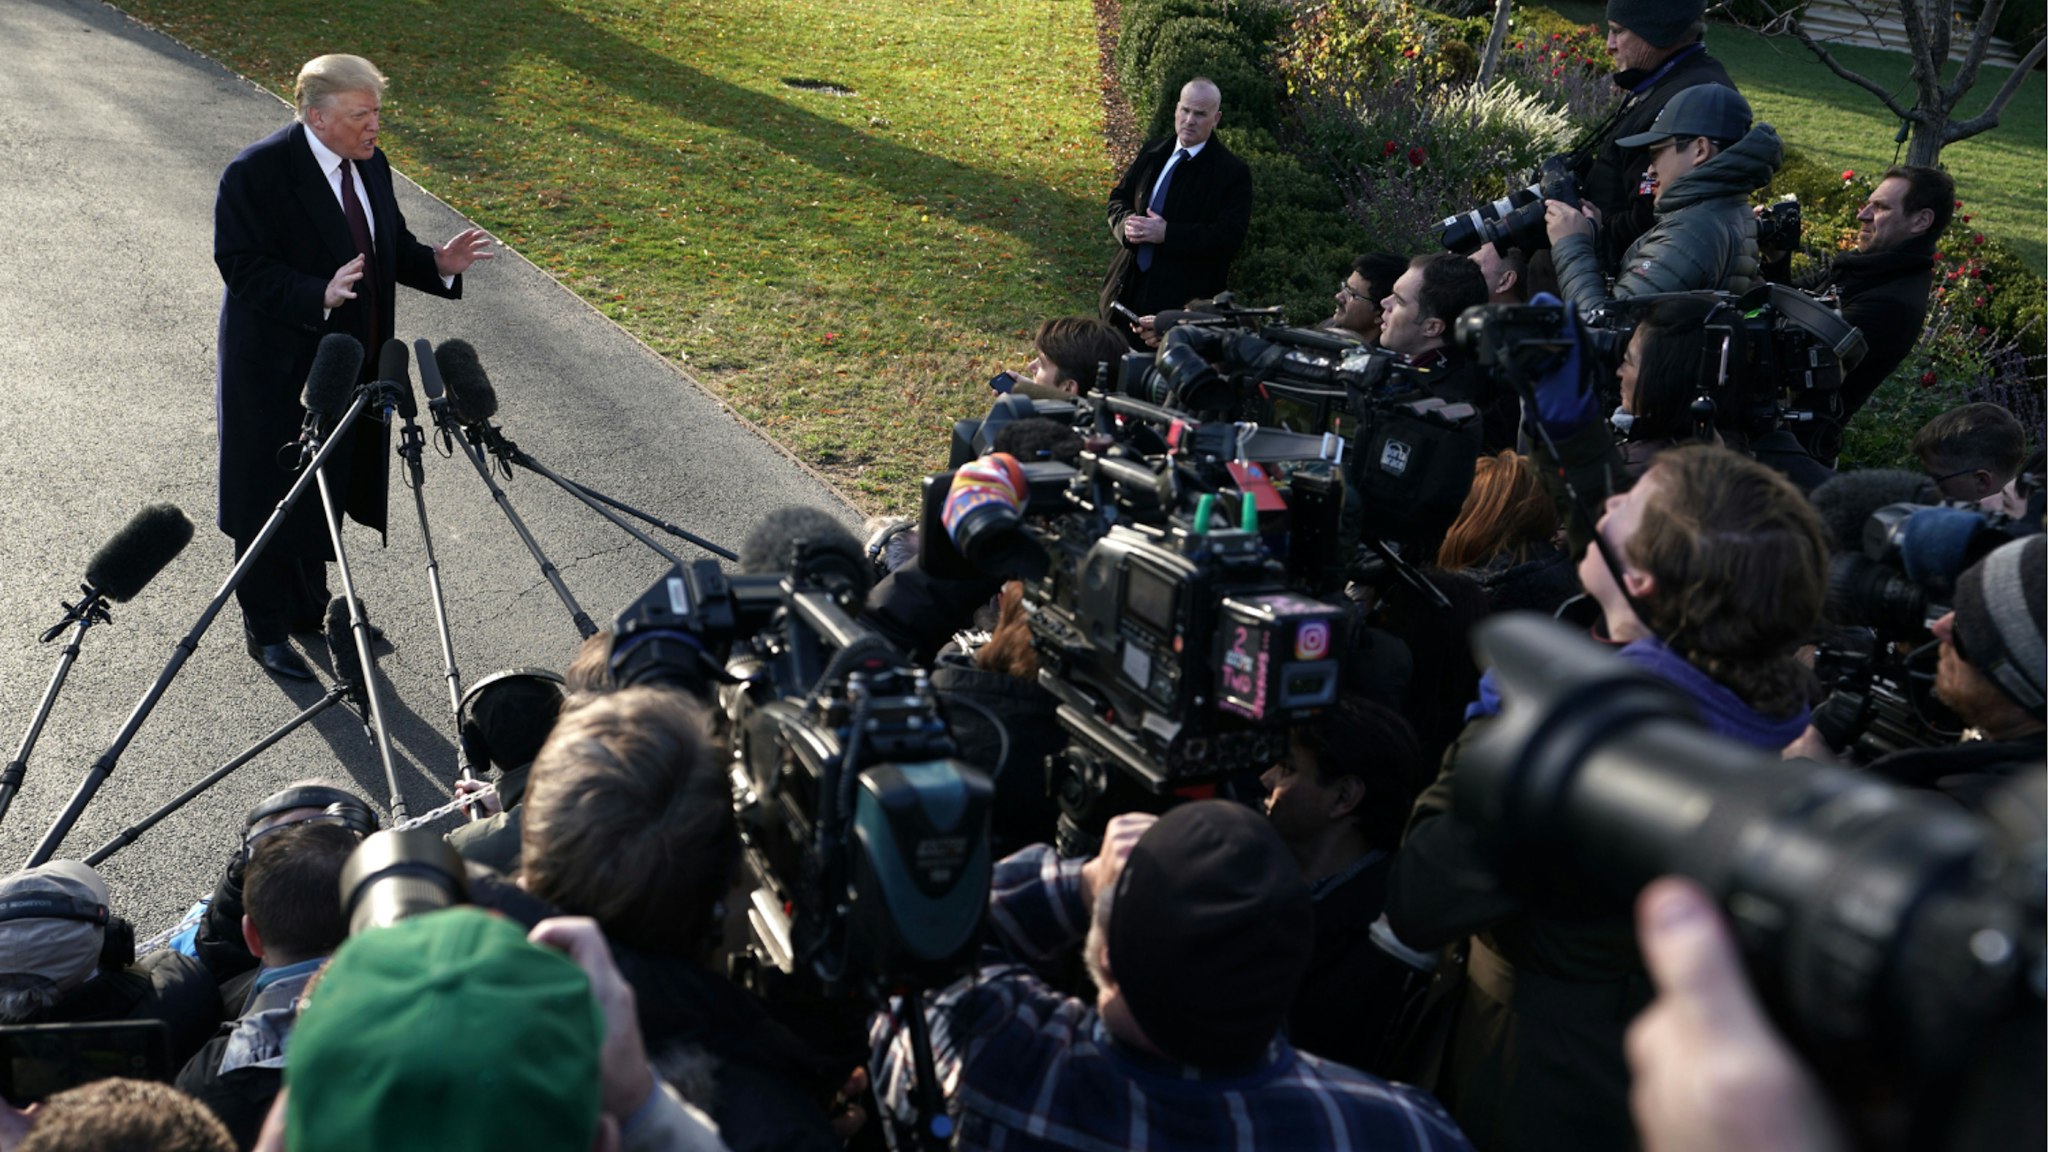 President Donald Trump speaks to members of the media prior to his departure from the White House November 20, 2018 in Washington, DC.